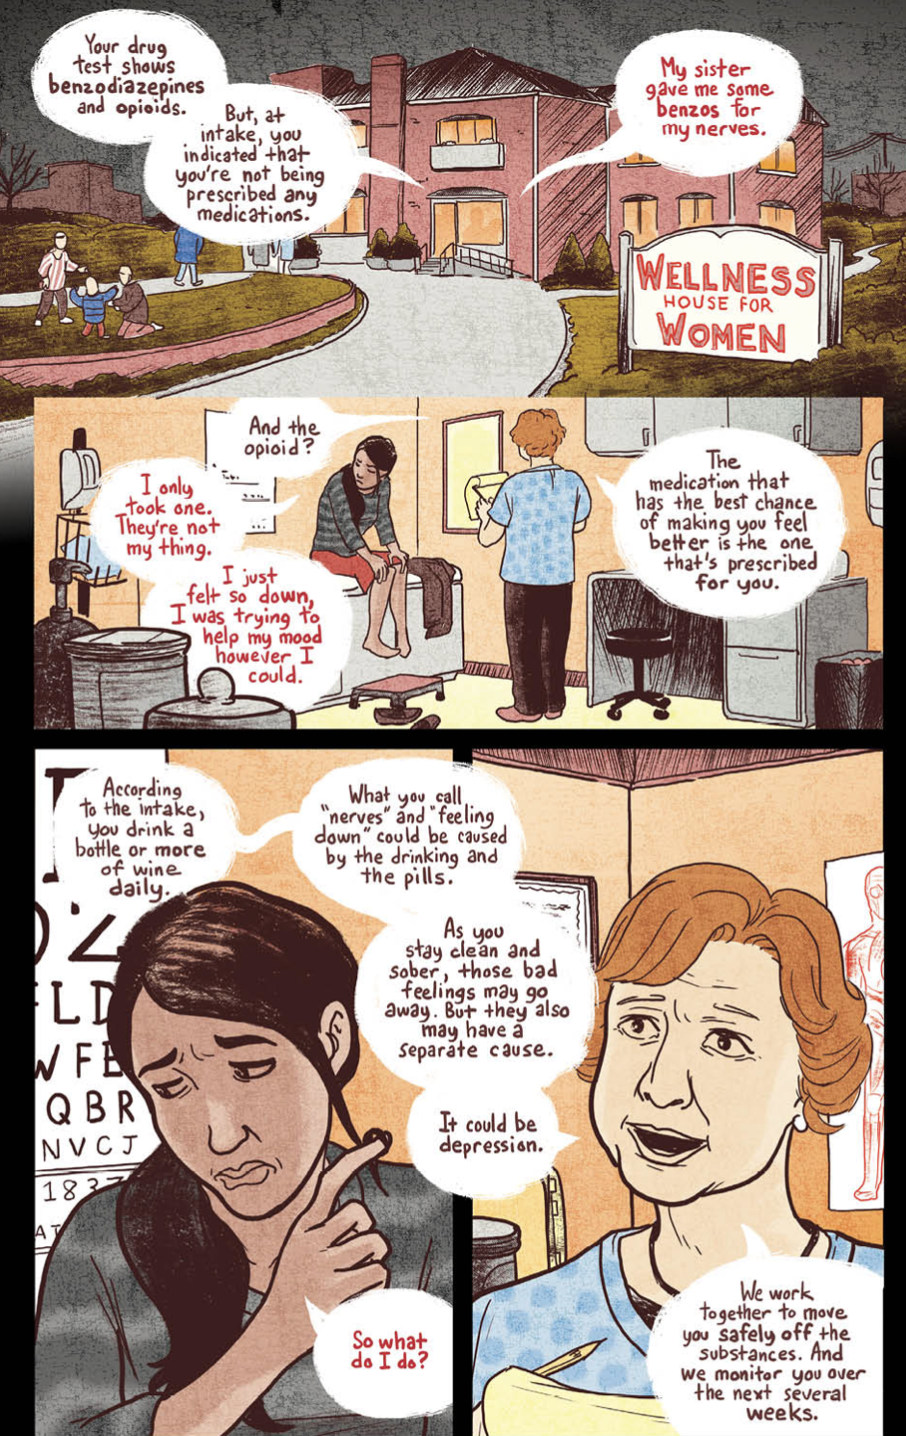 Sample page from People Recover Comic E-Pub